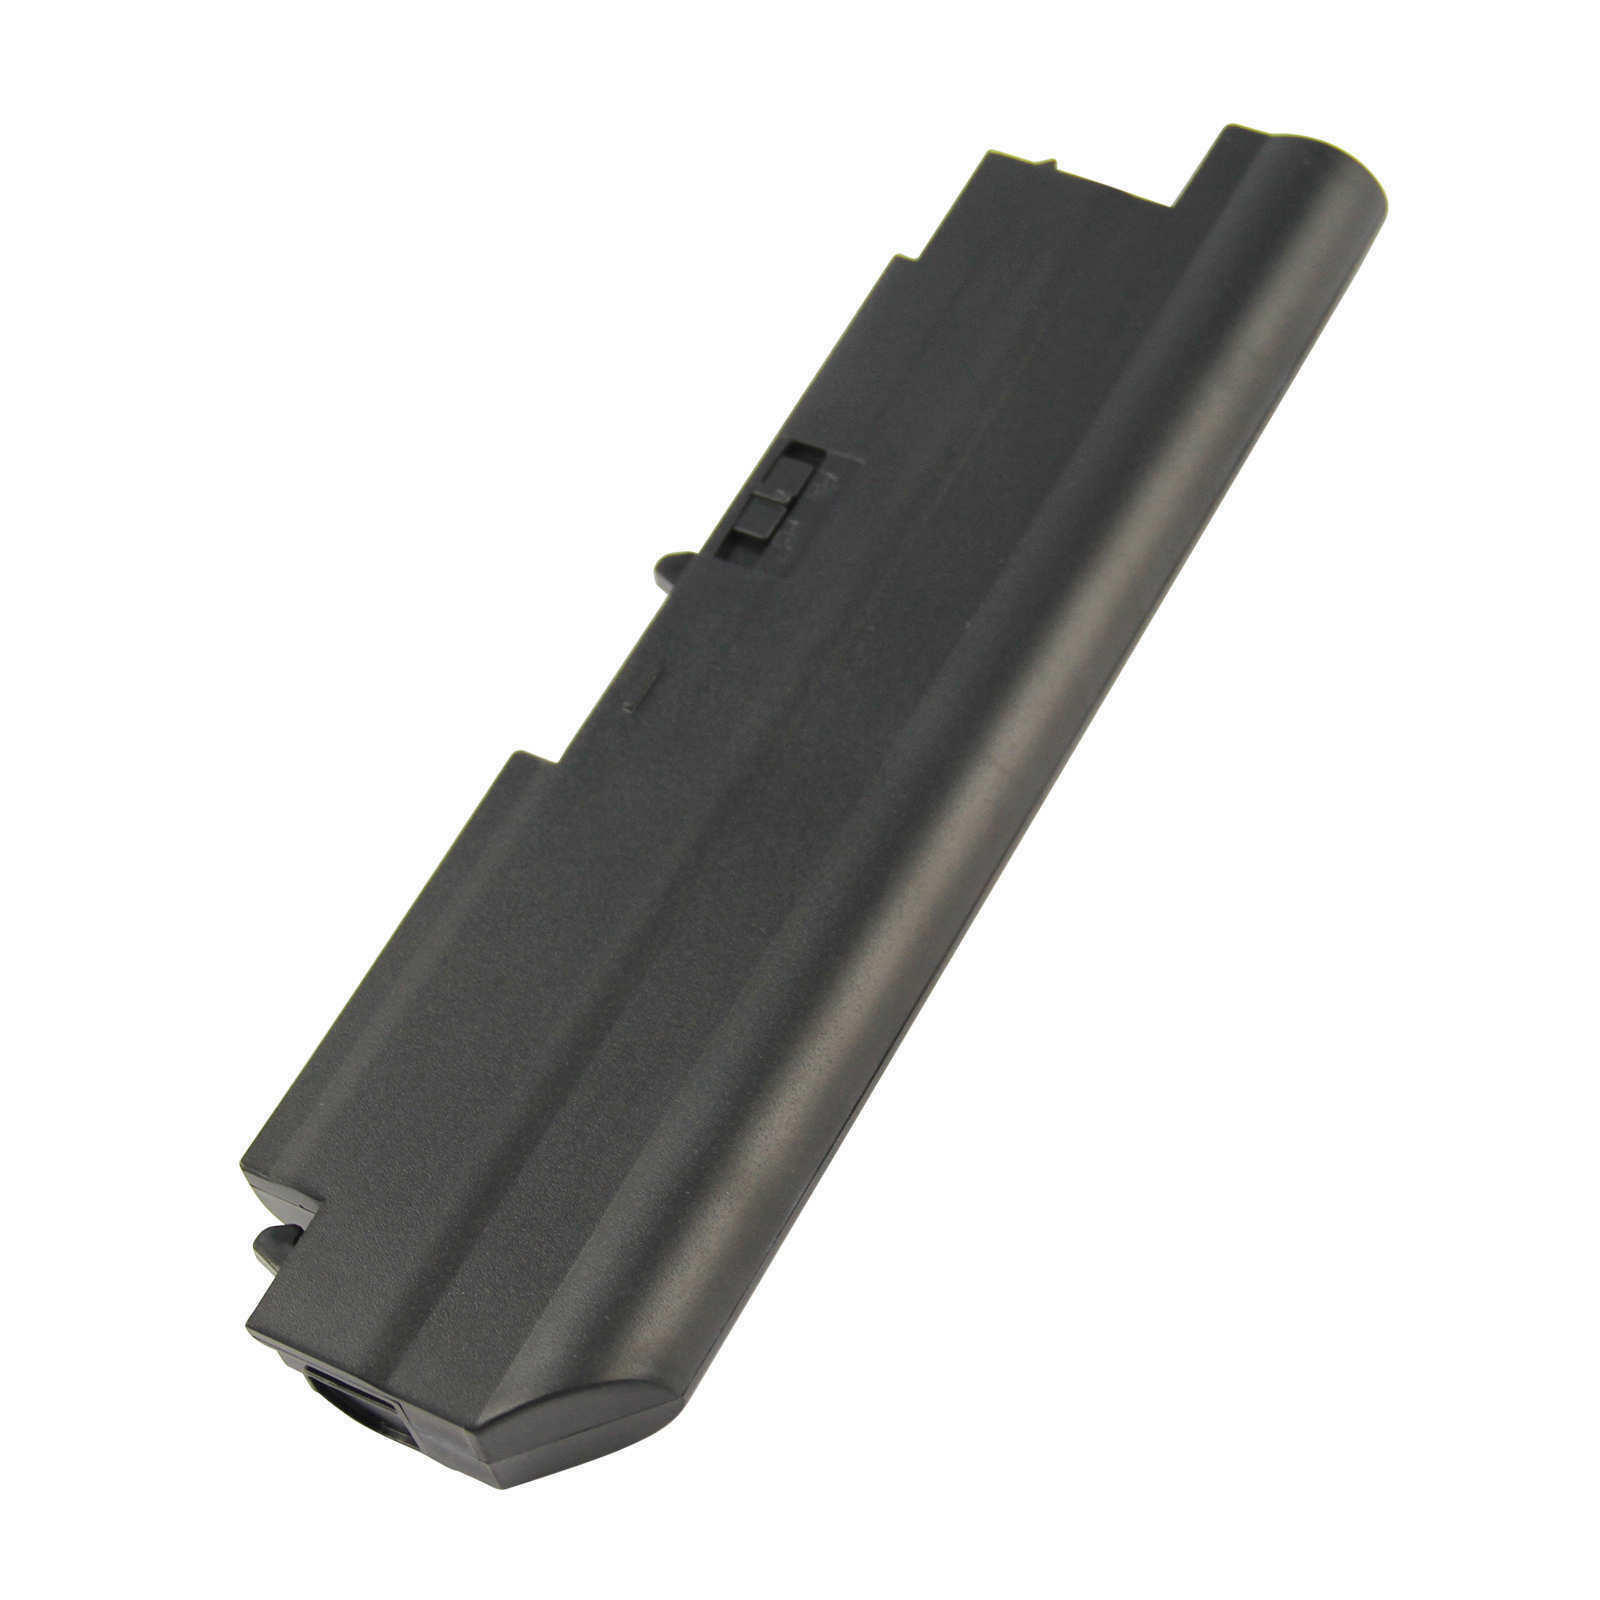 41U3198 Battery for Lenovo ThinkPad R61 T61 T400 R400 Series 14.1" Widescreen - image 5 of 5